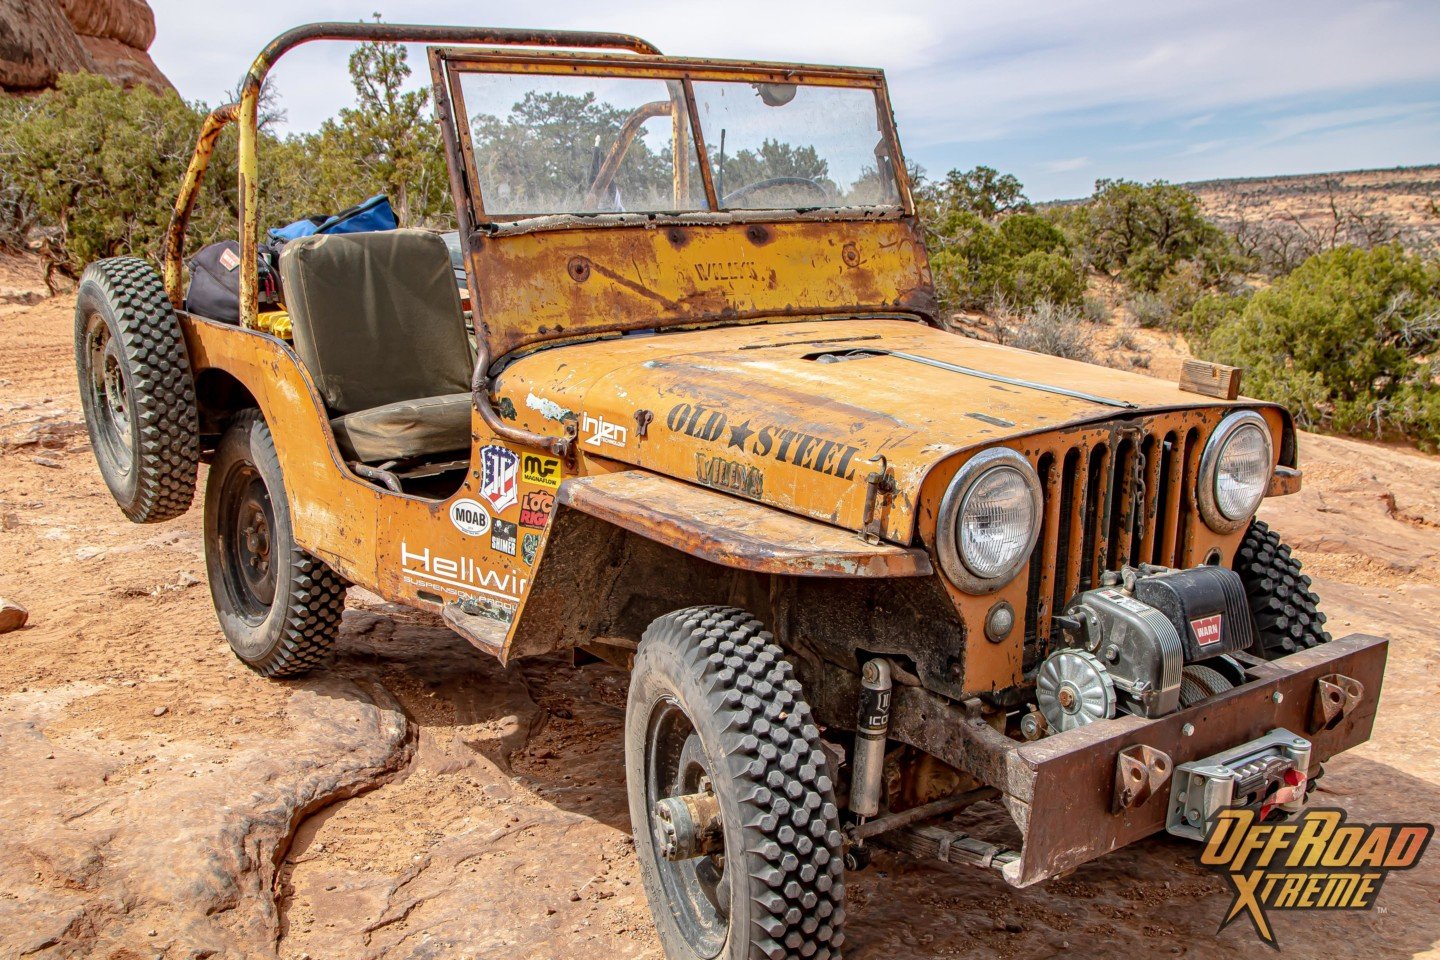 Mike Hallmark's Rustic And Rugged 1948 Jeep CJ 2A "Willis" Lives On